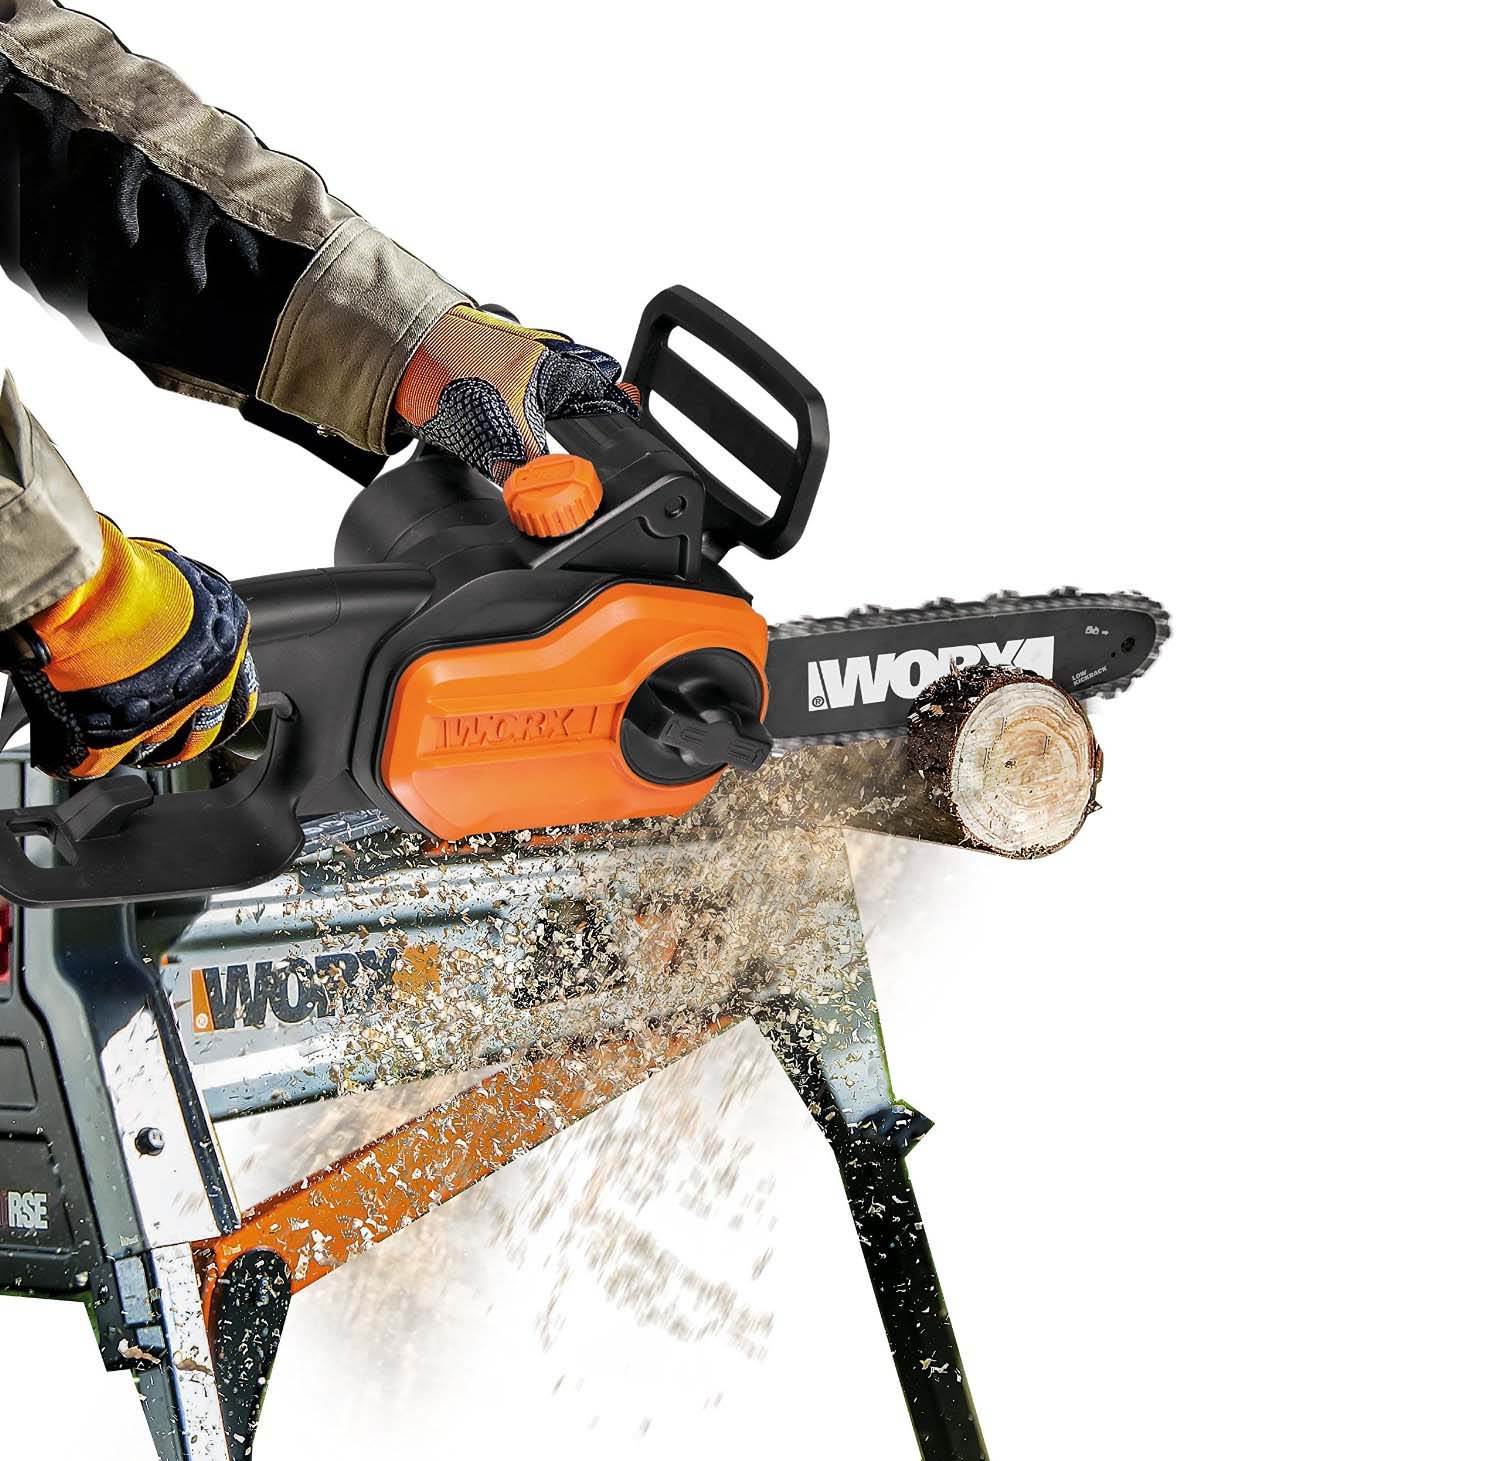 WORX WG309 8.0 Amp Electric Pole Saw, 10-Inch- Chainsaw and Pole Saw All in One - image 3 of 9